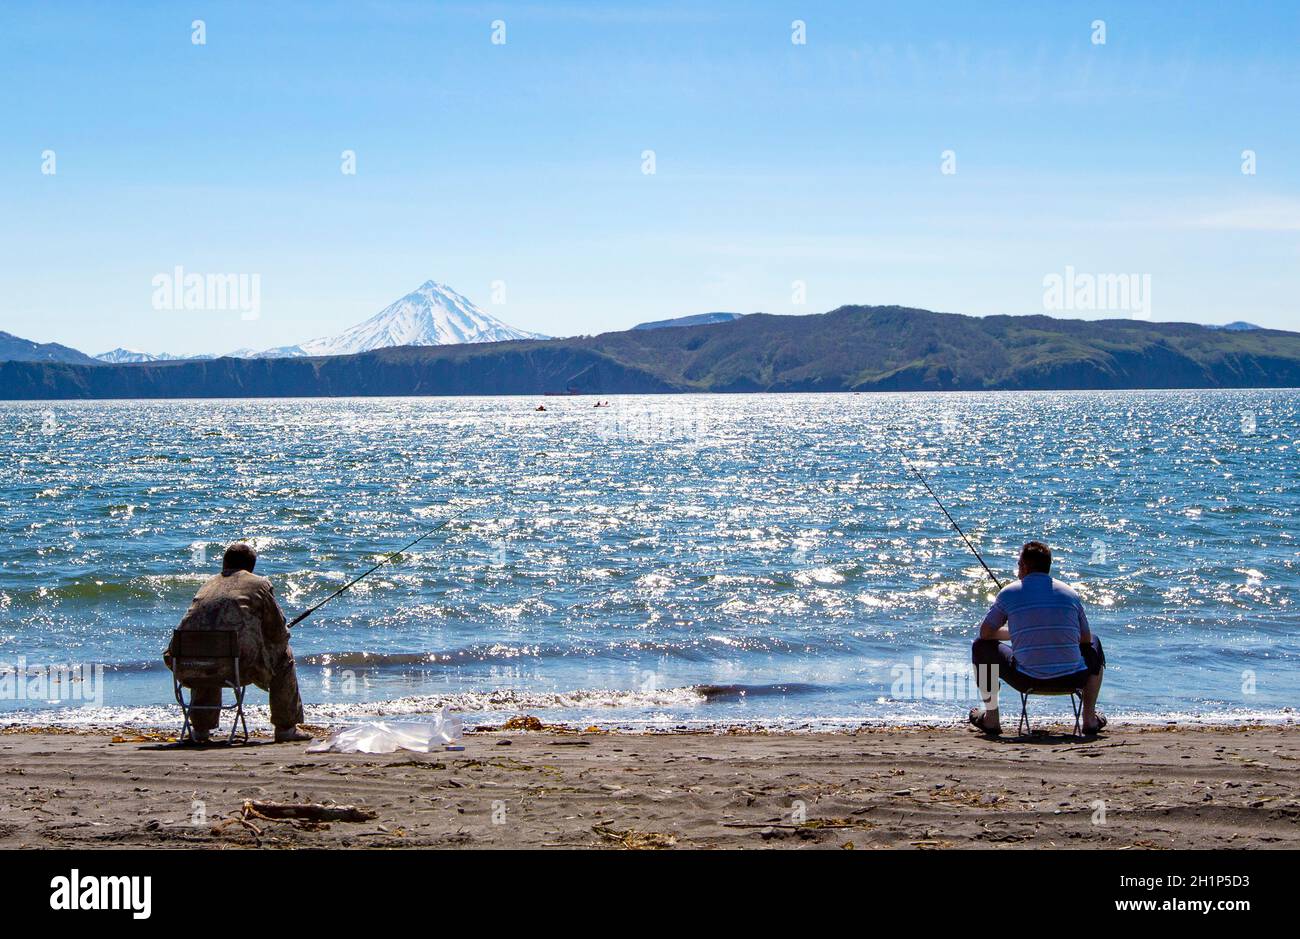 Fisherman sitting and fishing on the beach of Pacific ocean Stock Photo